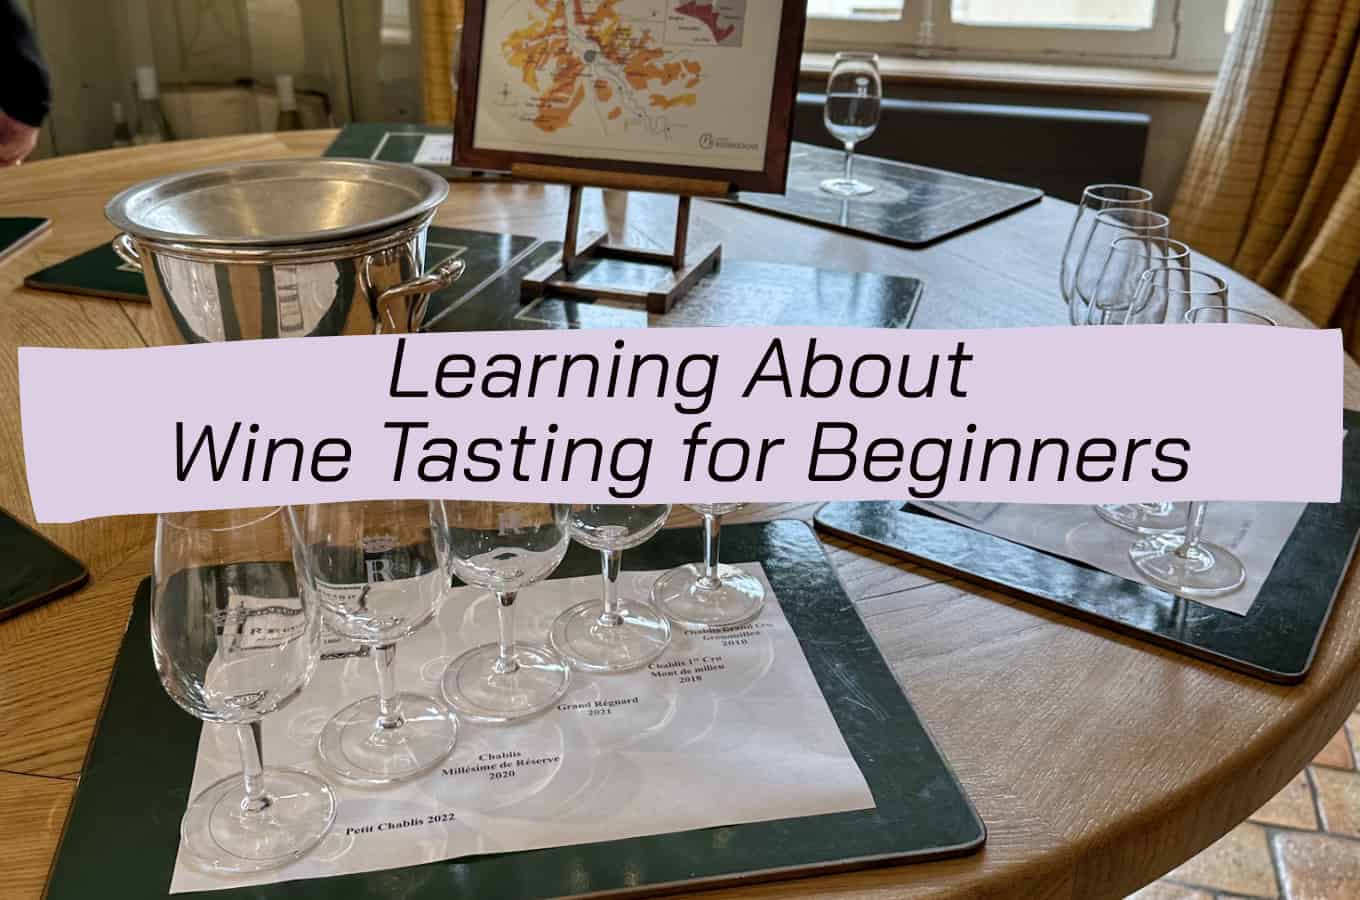 Learning About Wine Tasting for Beginners